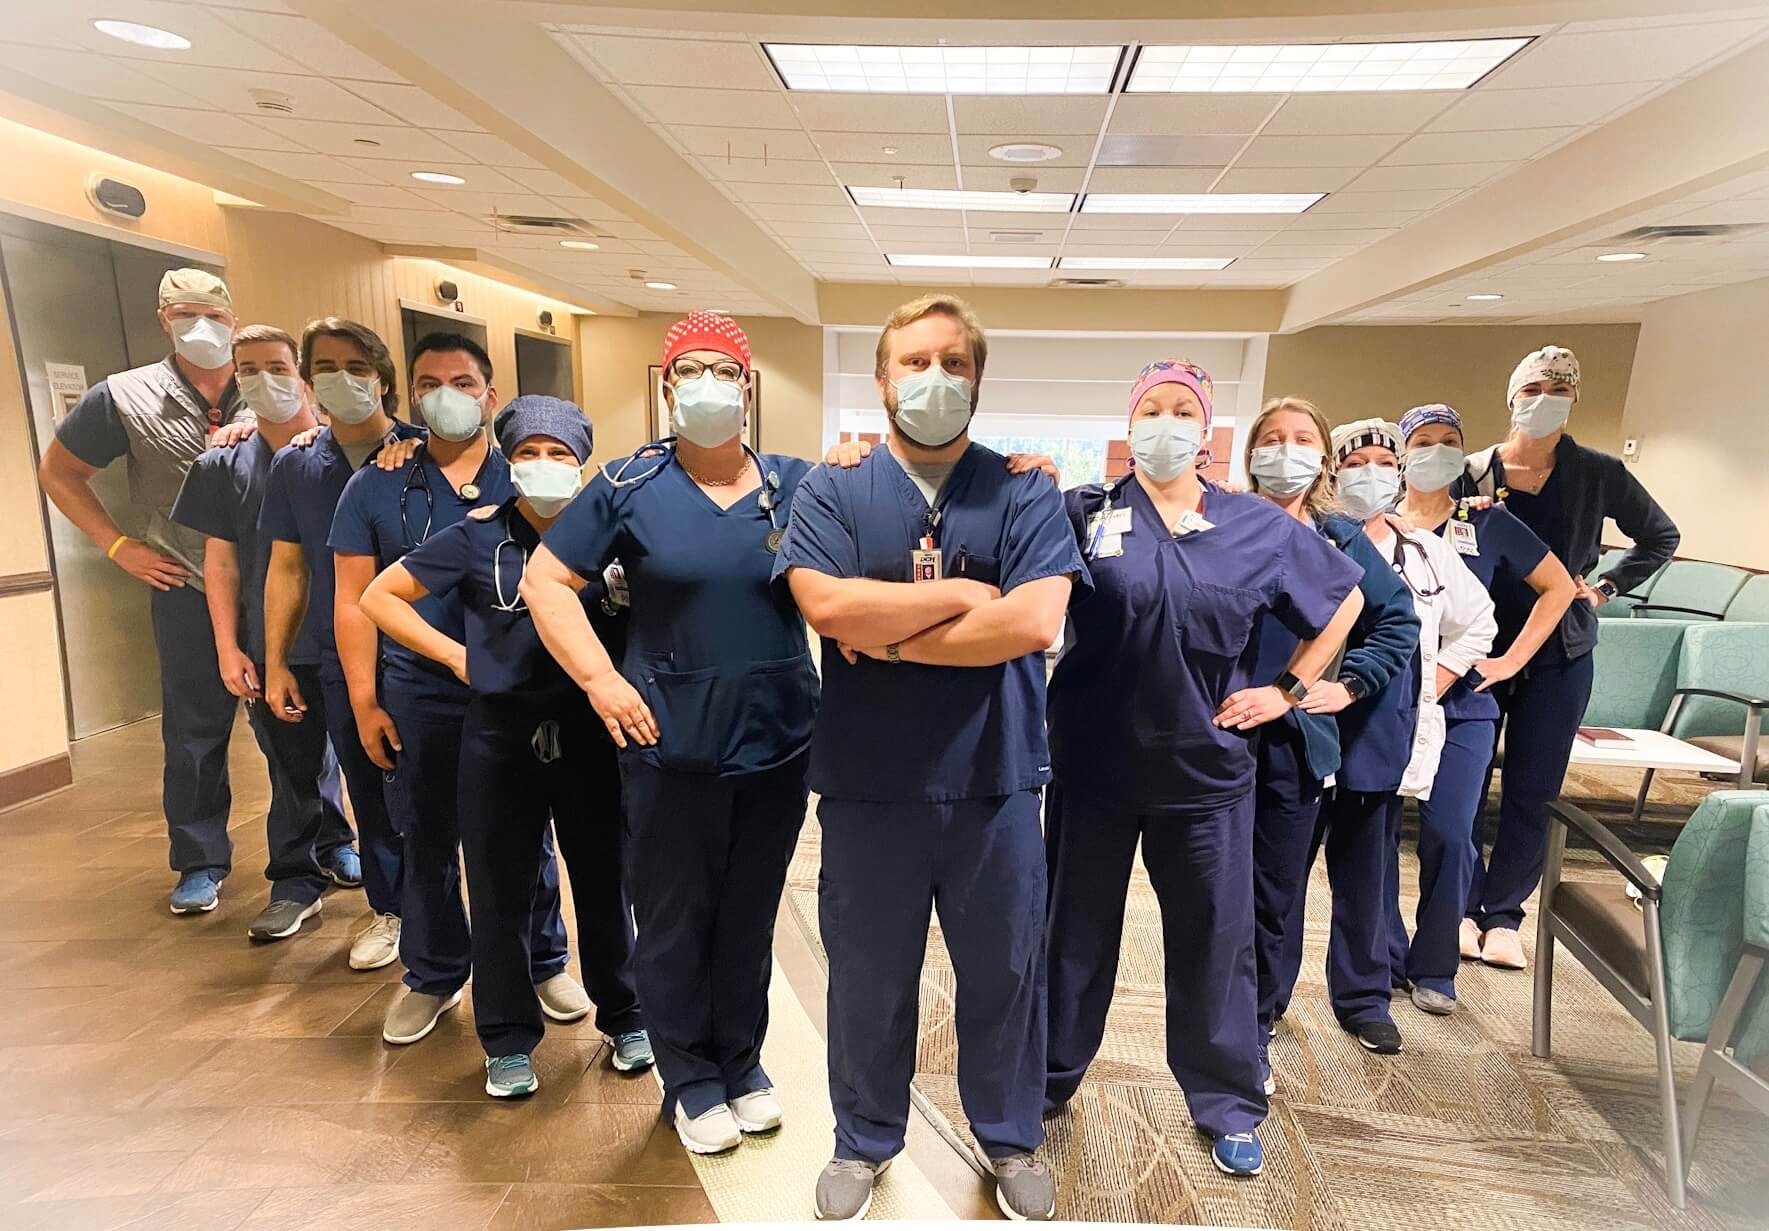 members of the combined Trauma/Surgical ICU and CICU unit